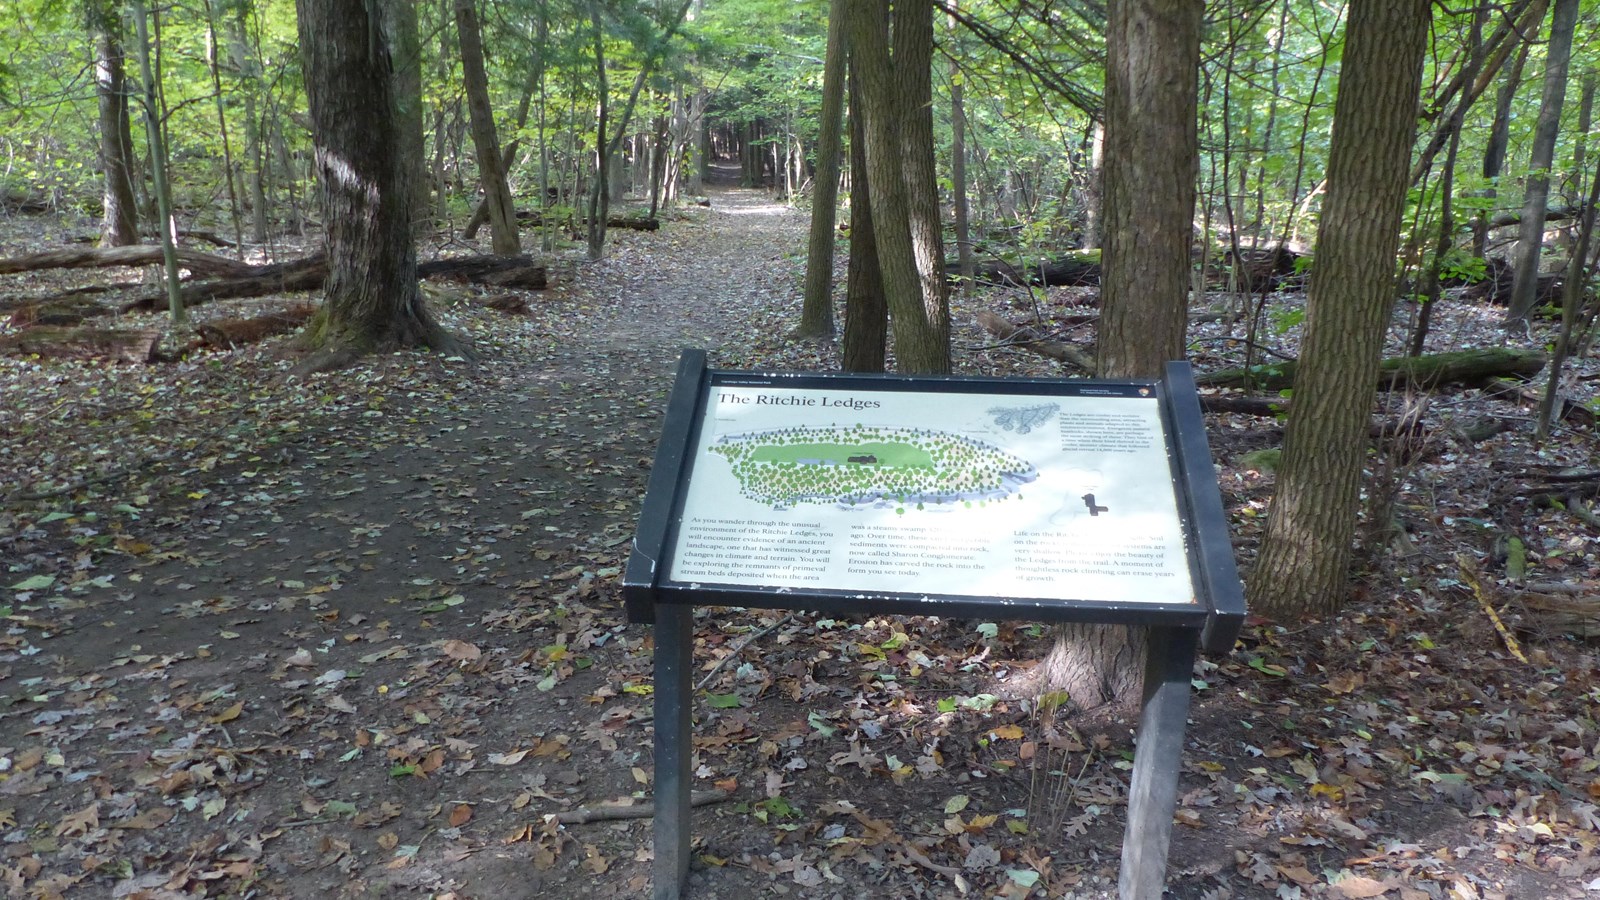 “Ritchie Ledges” panel stands along an unpaved trail surrounded by tree trunks and fallen leaves.